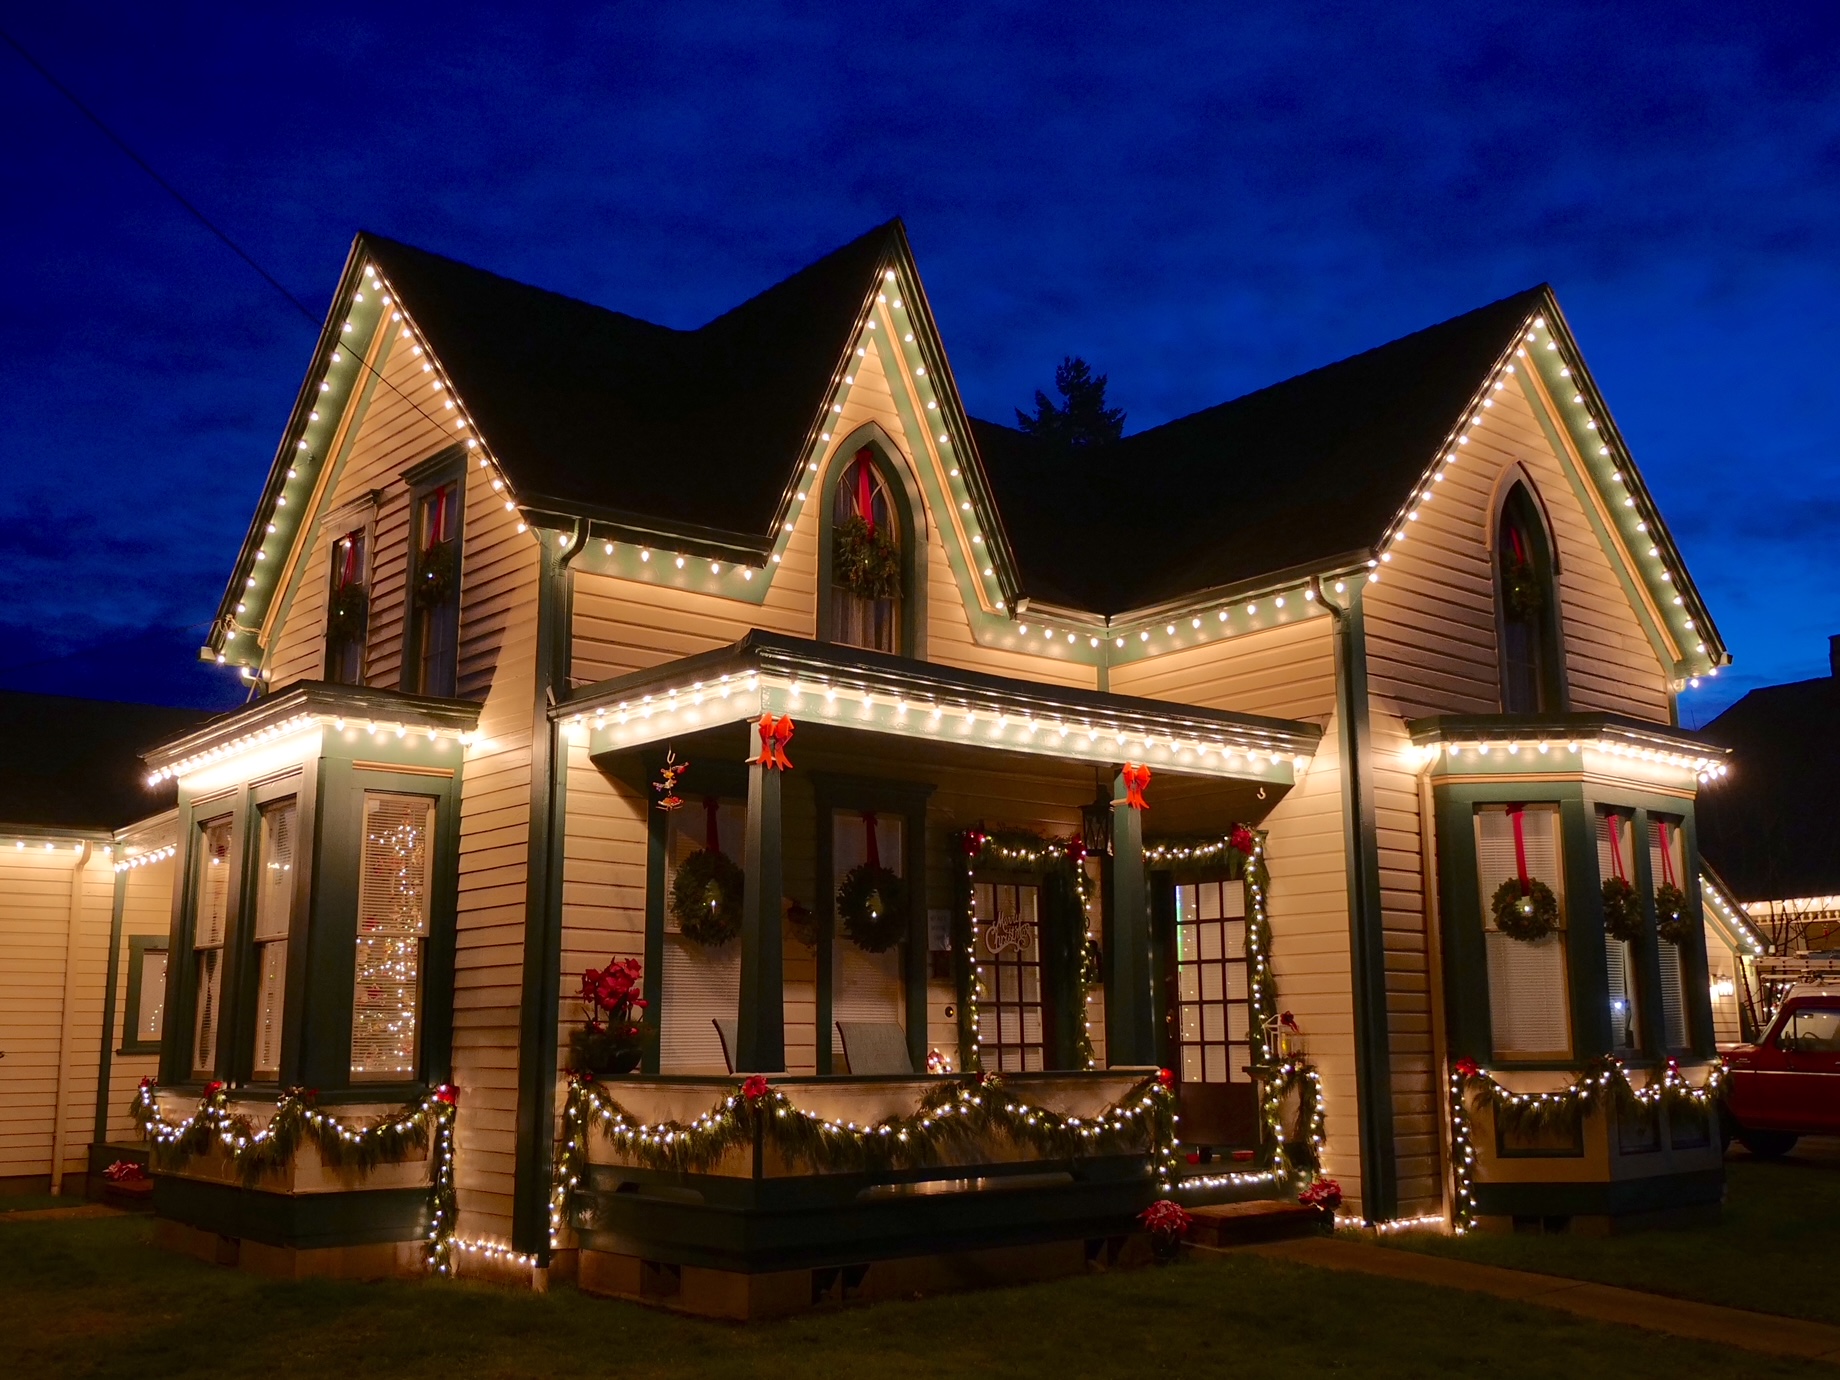 Historic home decorated for the holidays